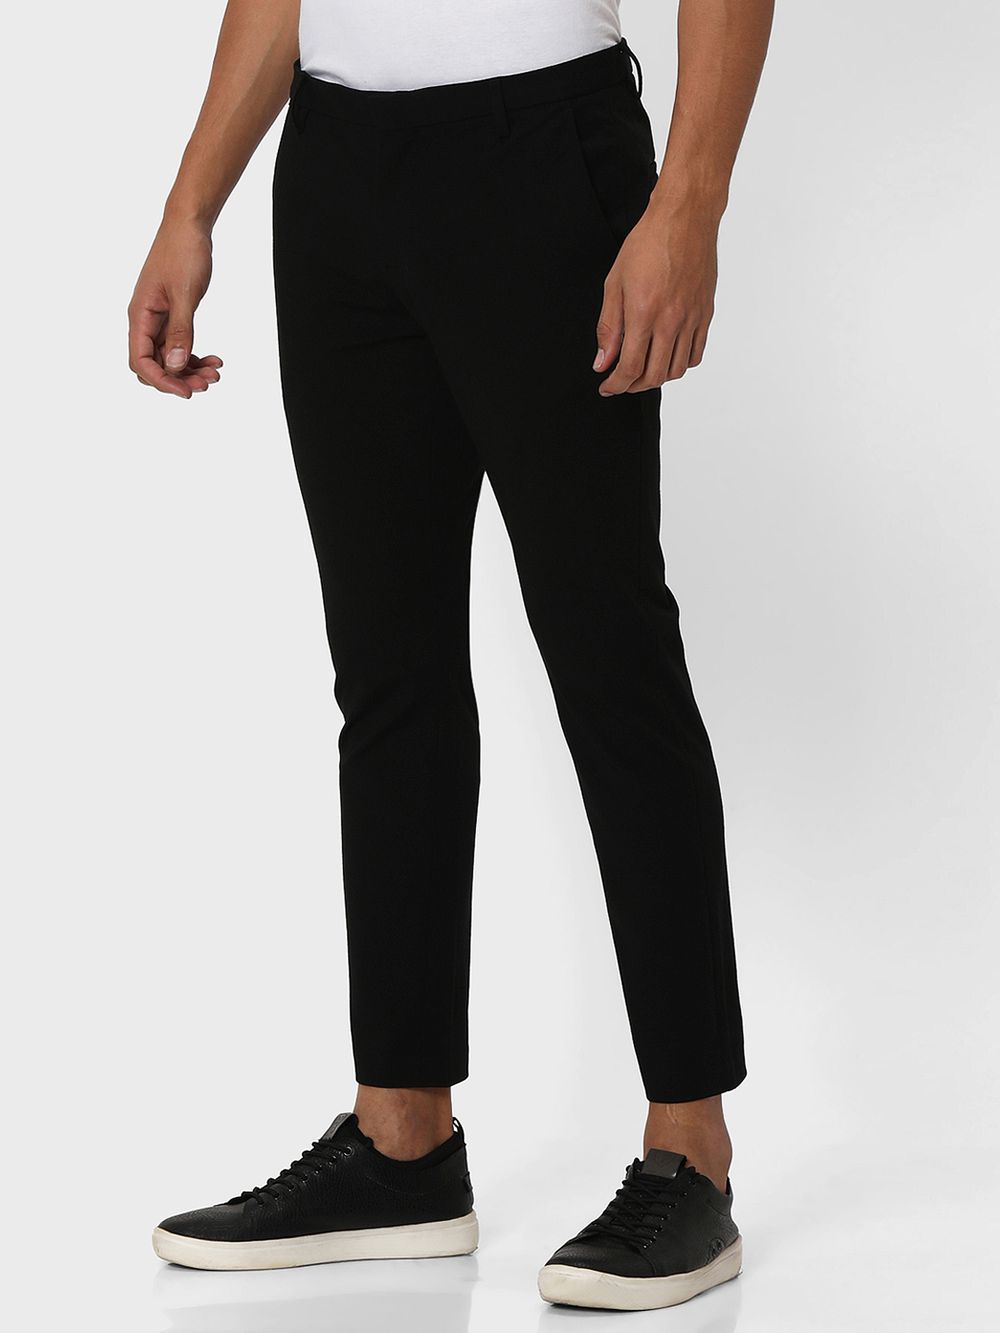 Black Ankle Length Stretch Chinos Trouser